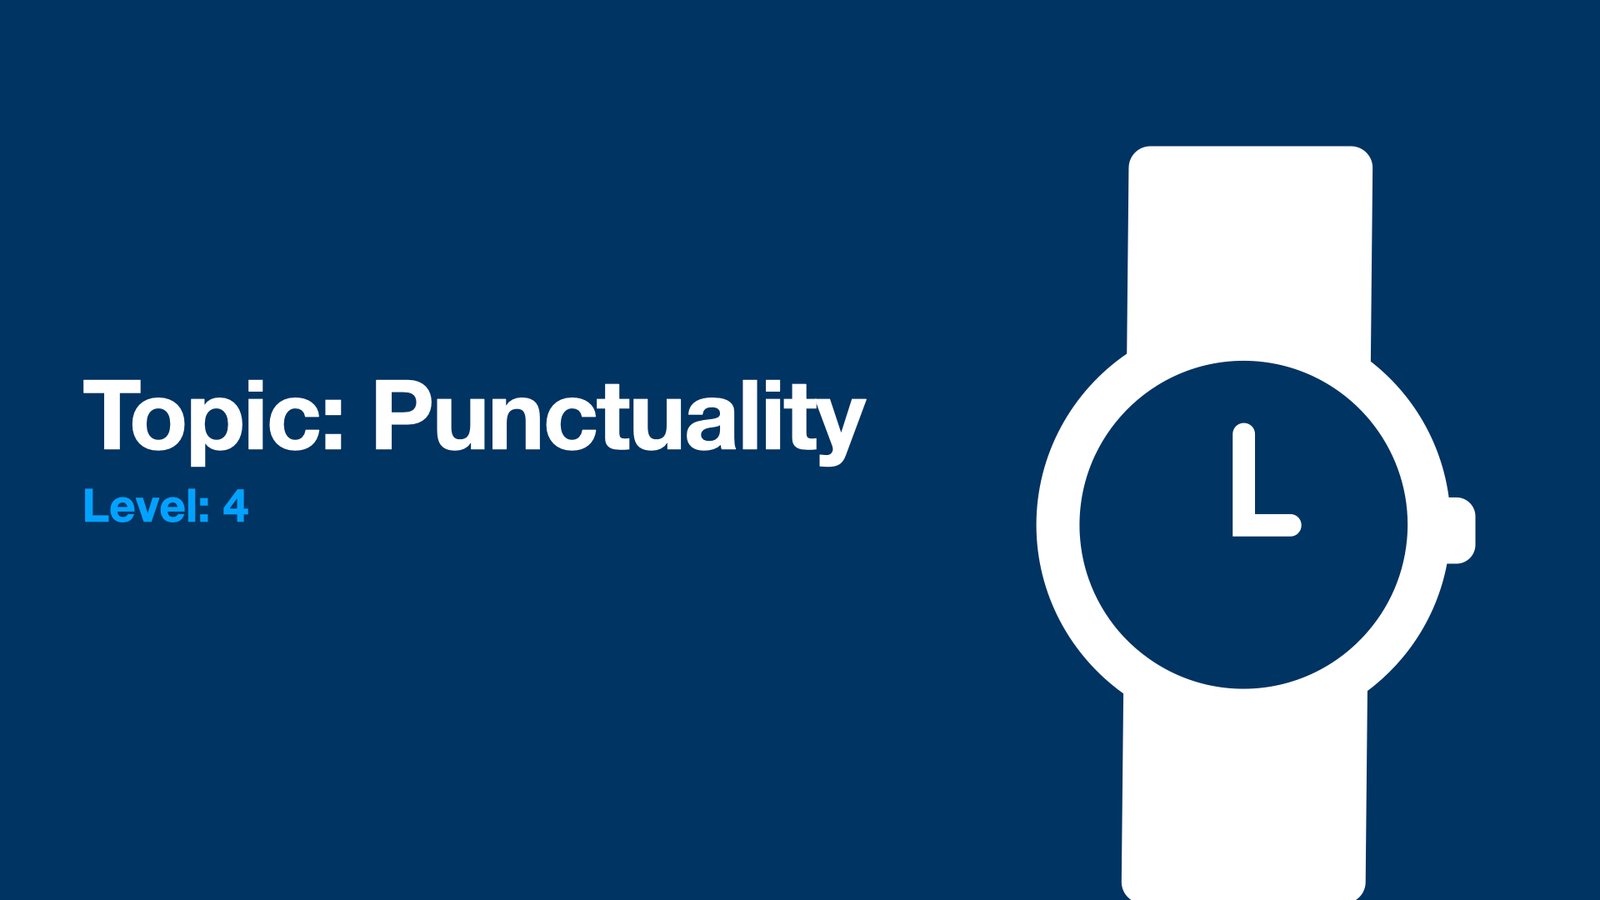 Presentation slide on Punctuality, Level 4 with clock icon.